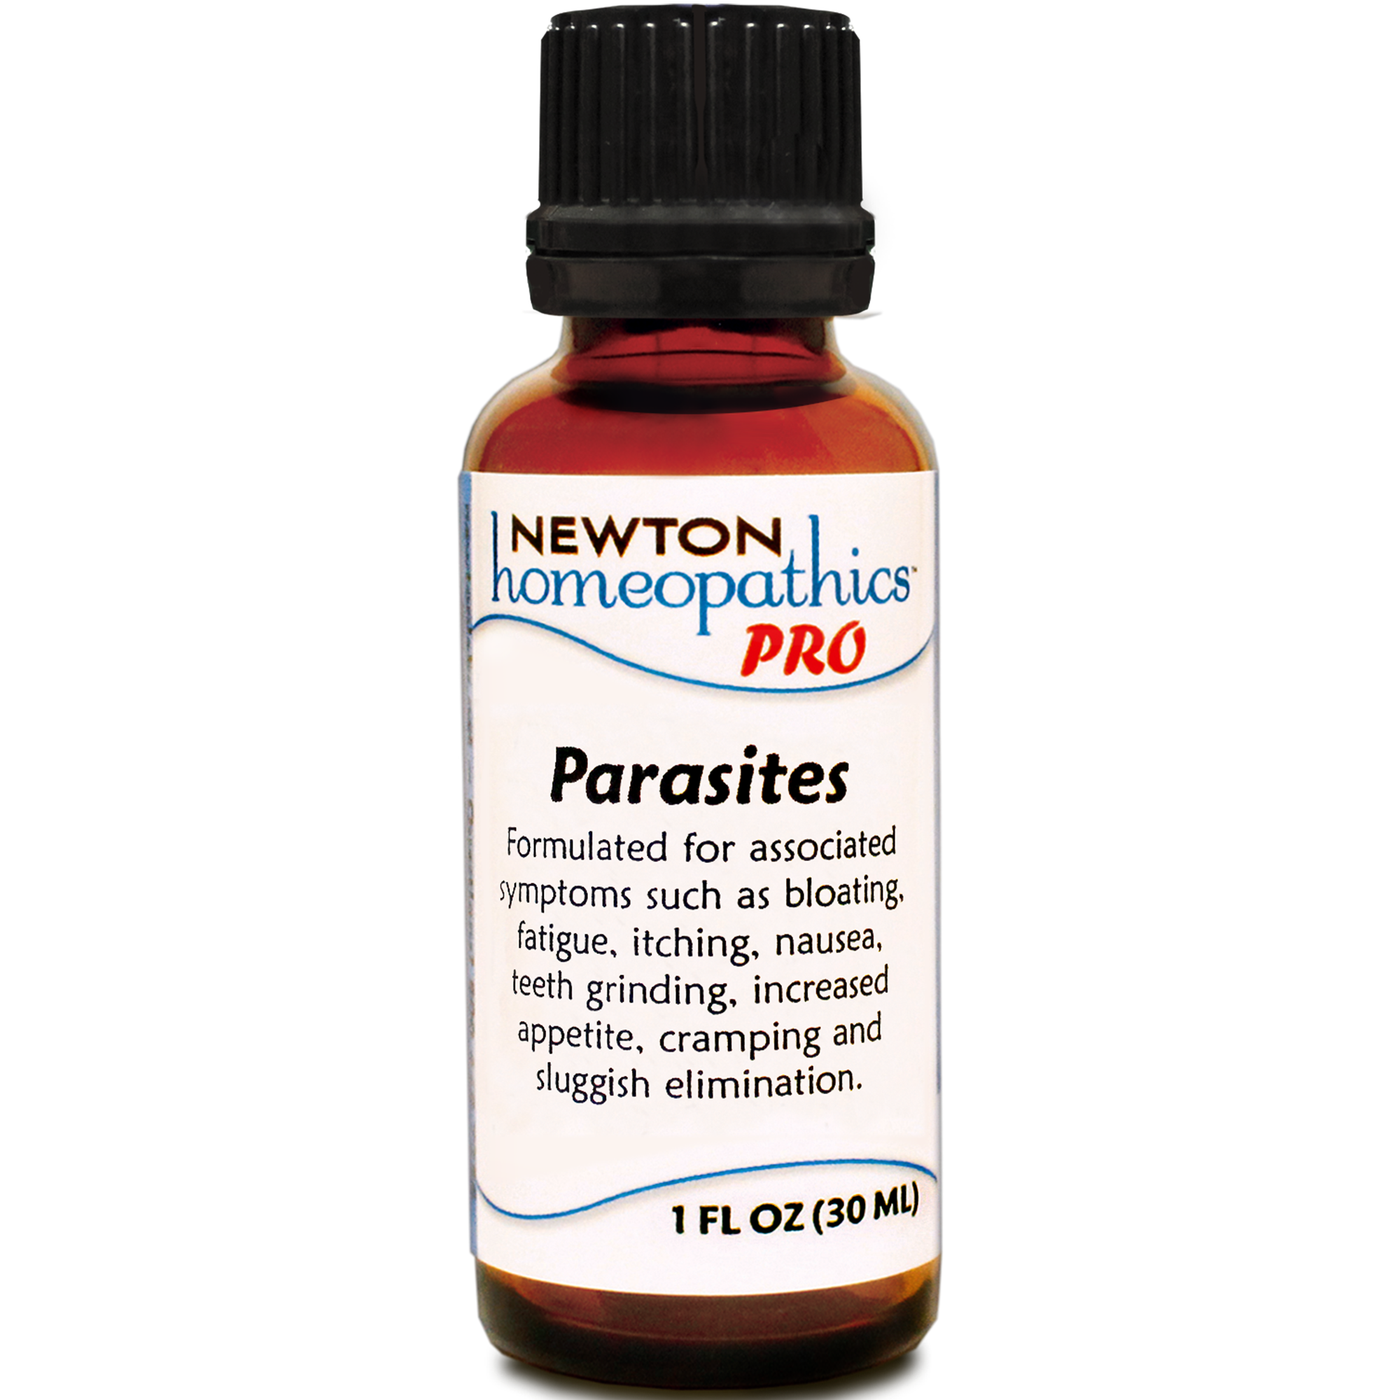 PRO Parasites 1 fl oz Curated Wellness